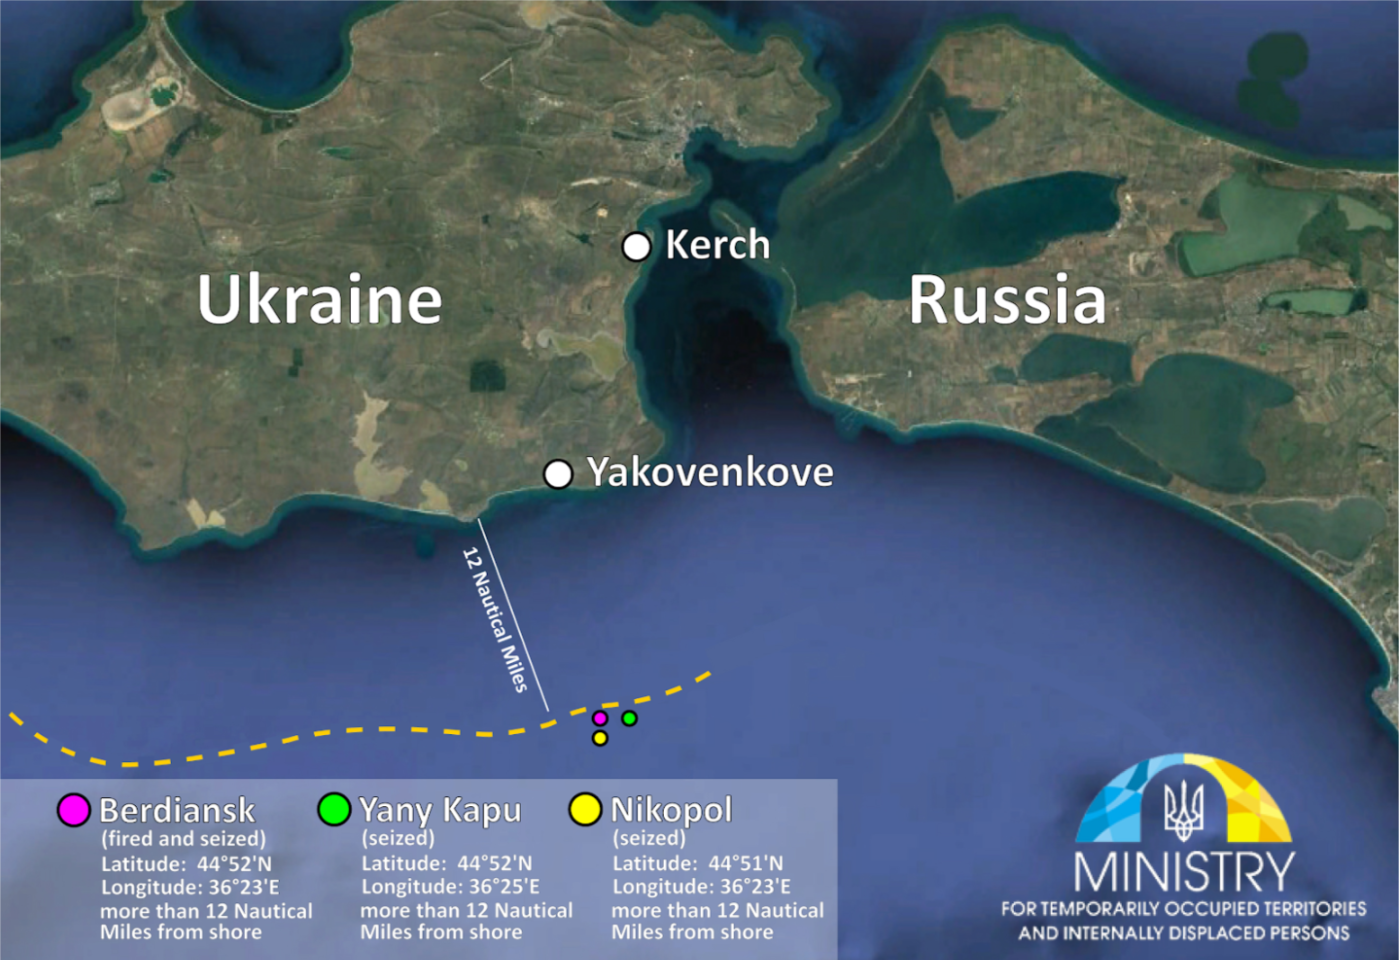 Image 9: Ukrainian release showing the locations of the capture of the three ships. 